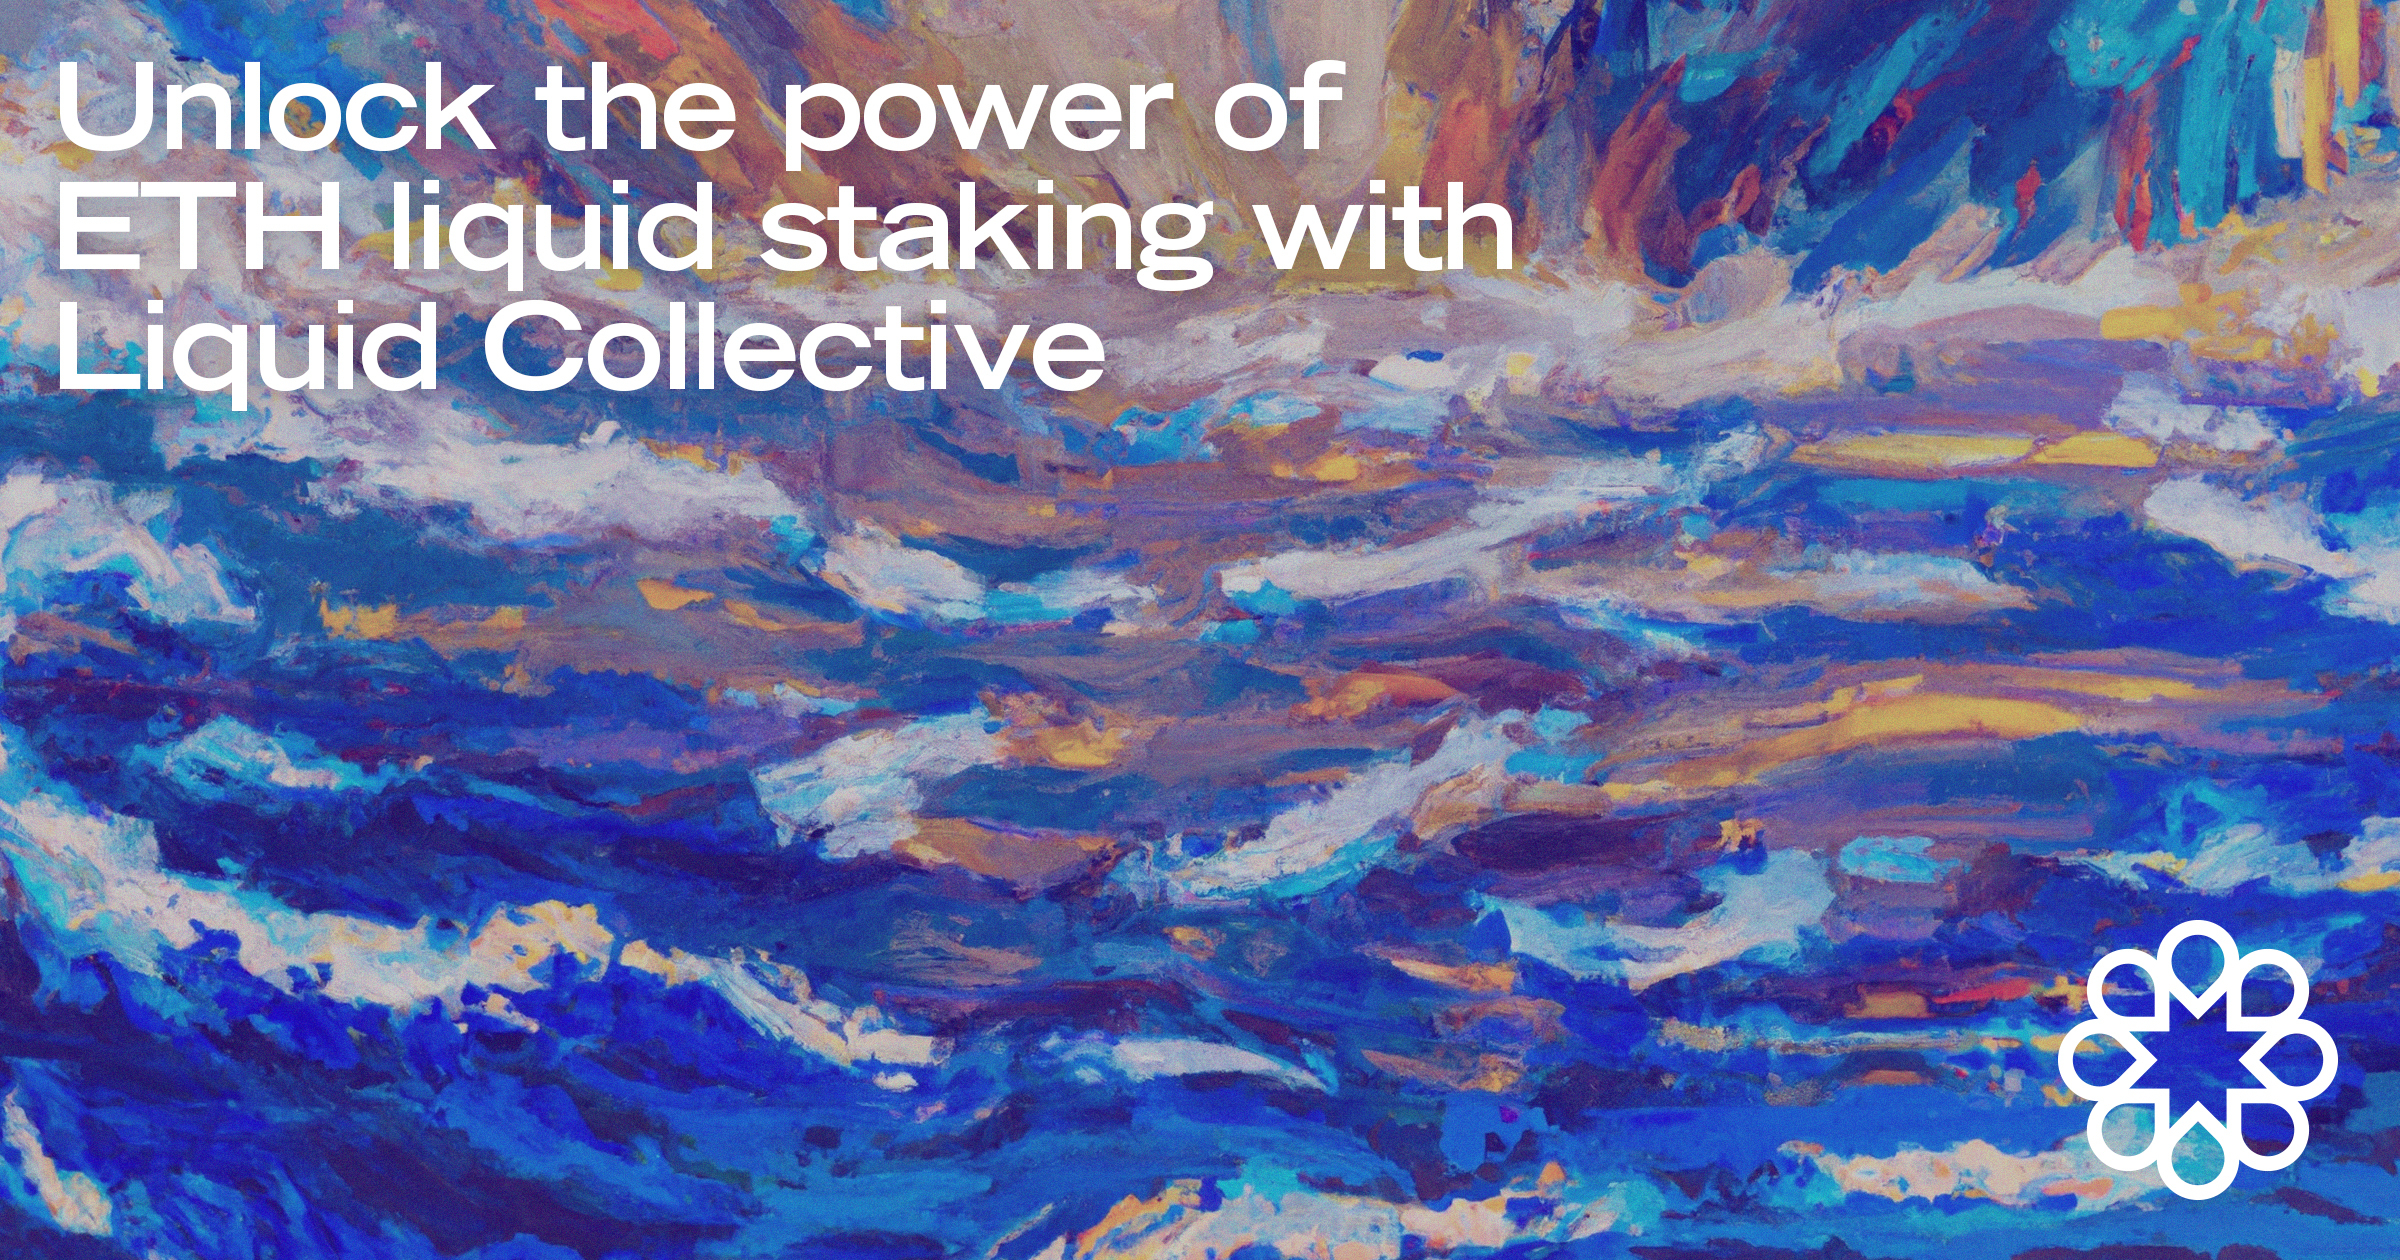 Unlock the power of ETH liquid staking with Liquid Collective